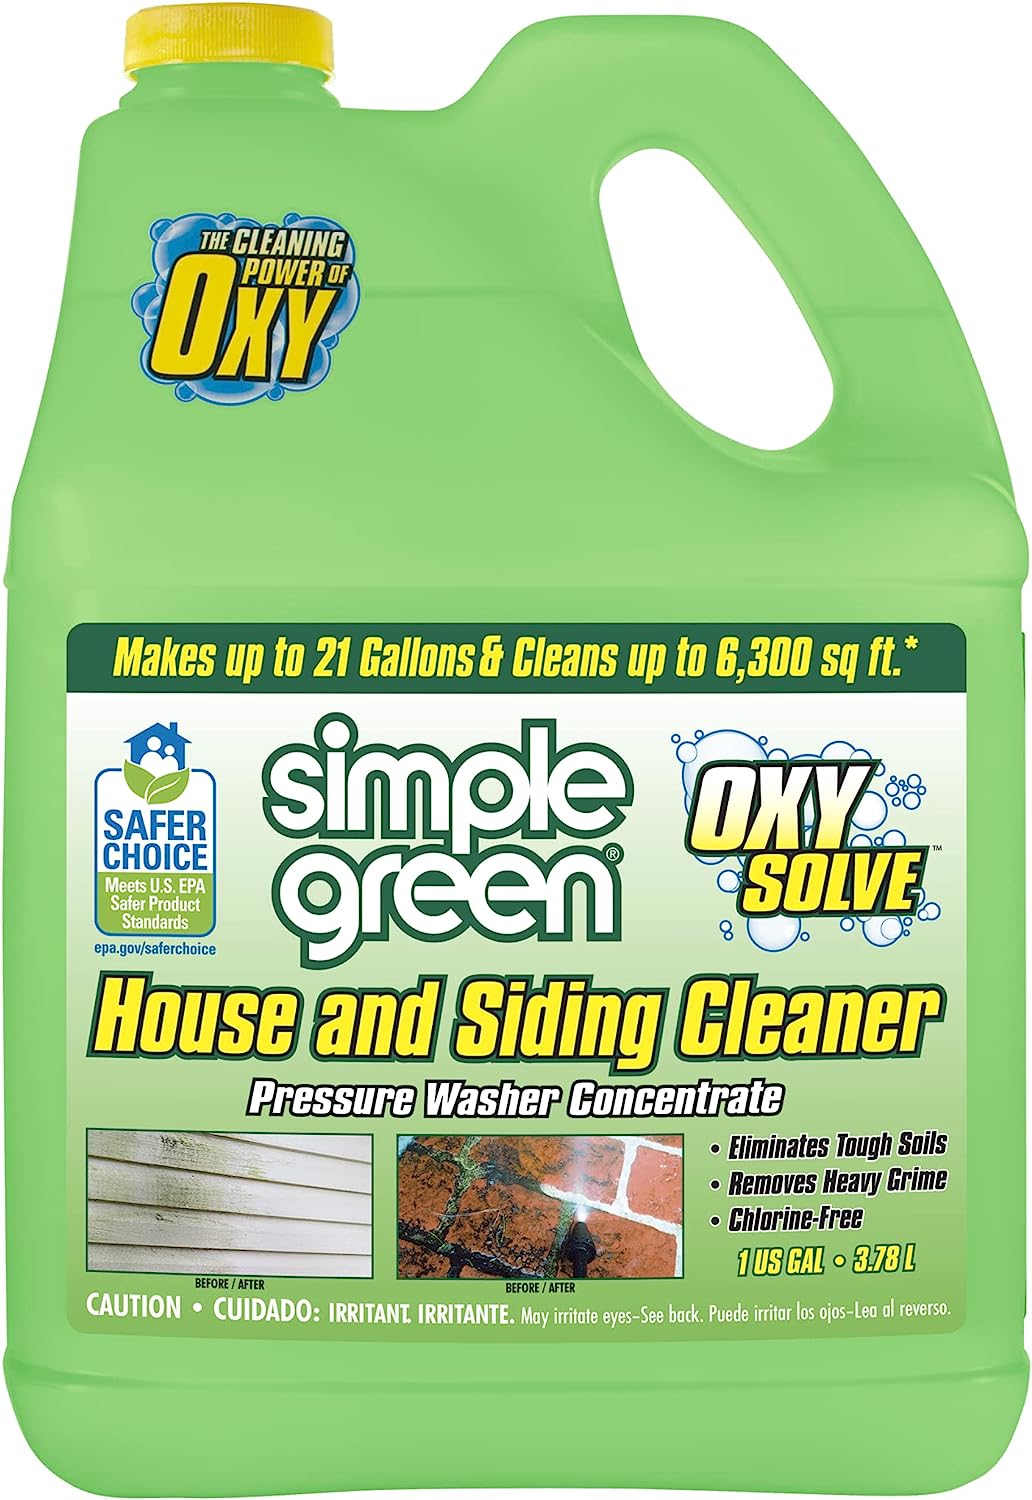 Oxy Solve House and Siding Pressure Washer Cleaner - [...]